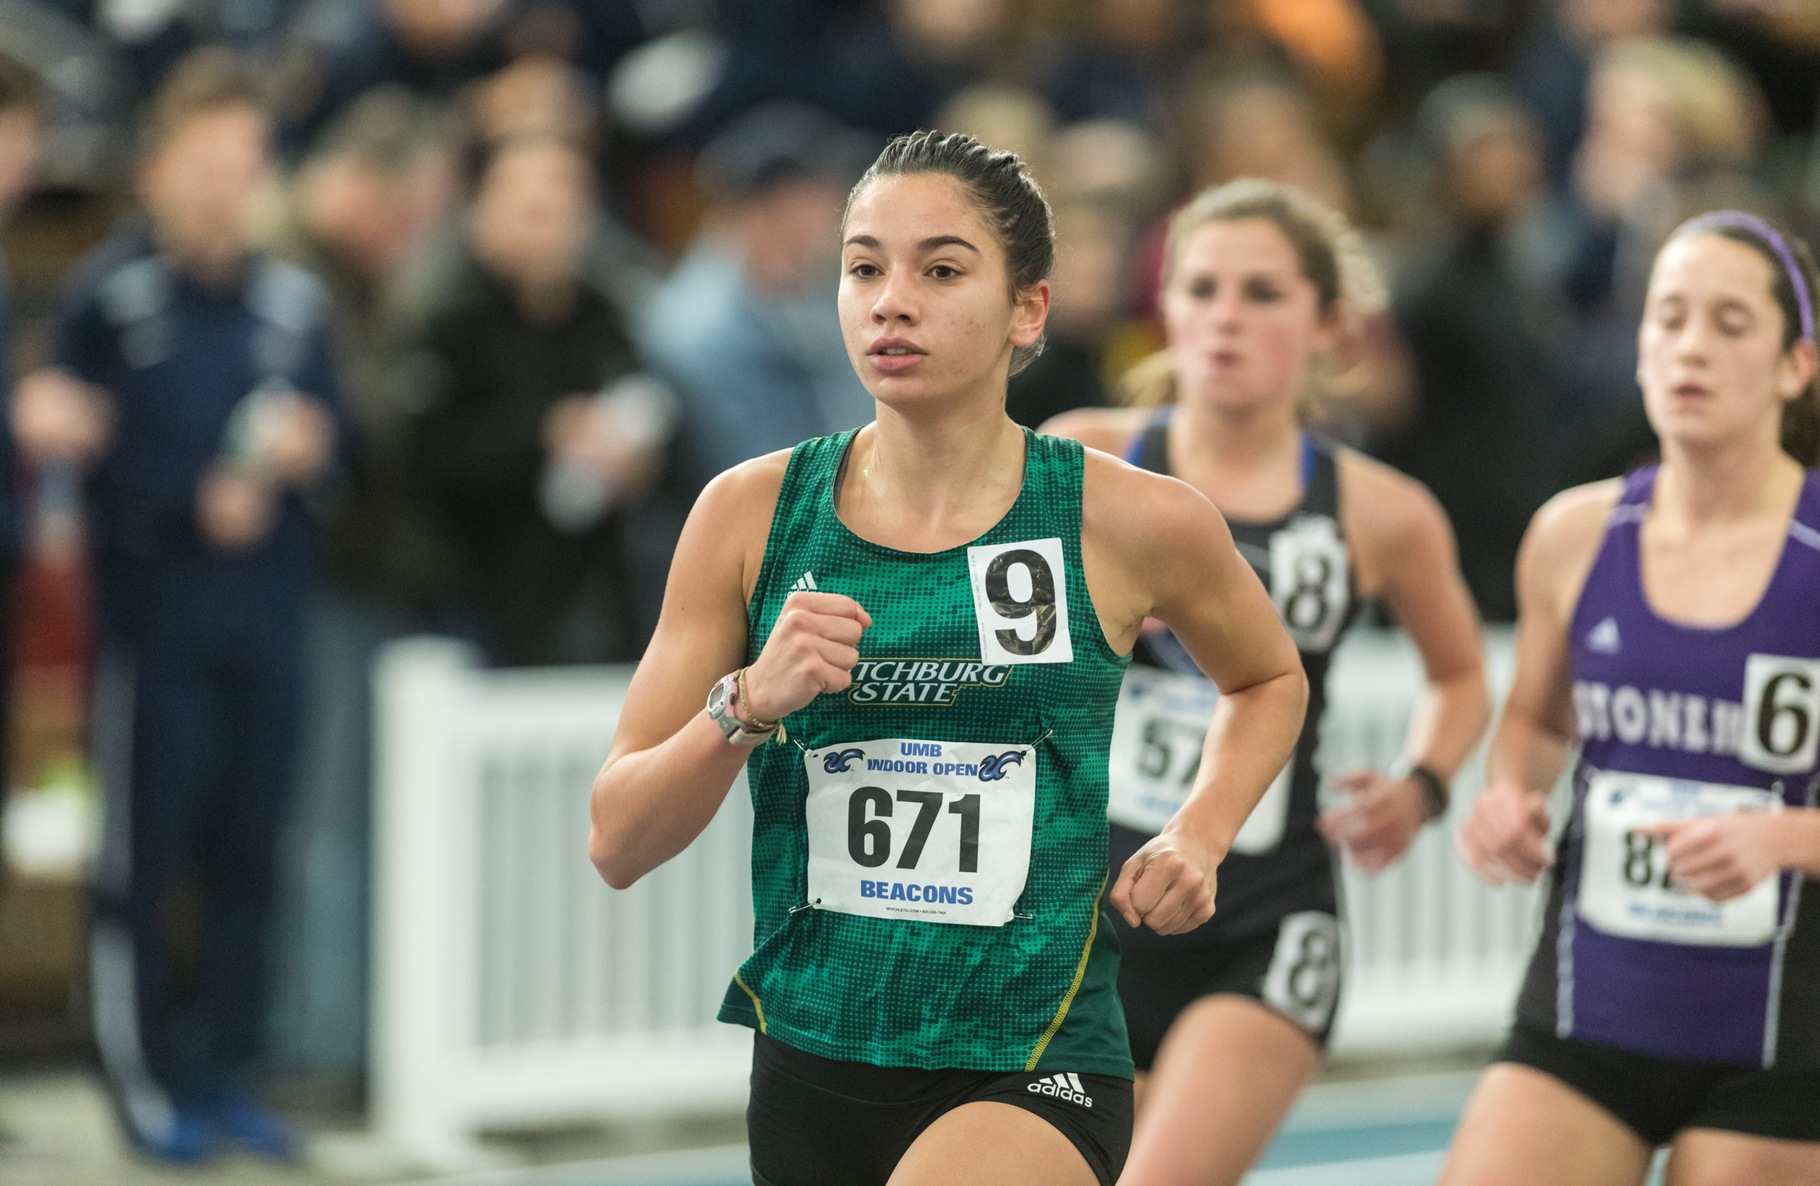 Fitchburg State Shines At Dartmouth Relays